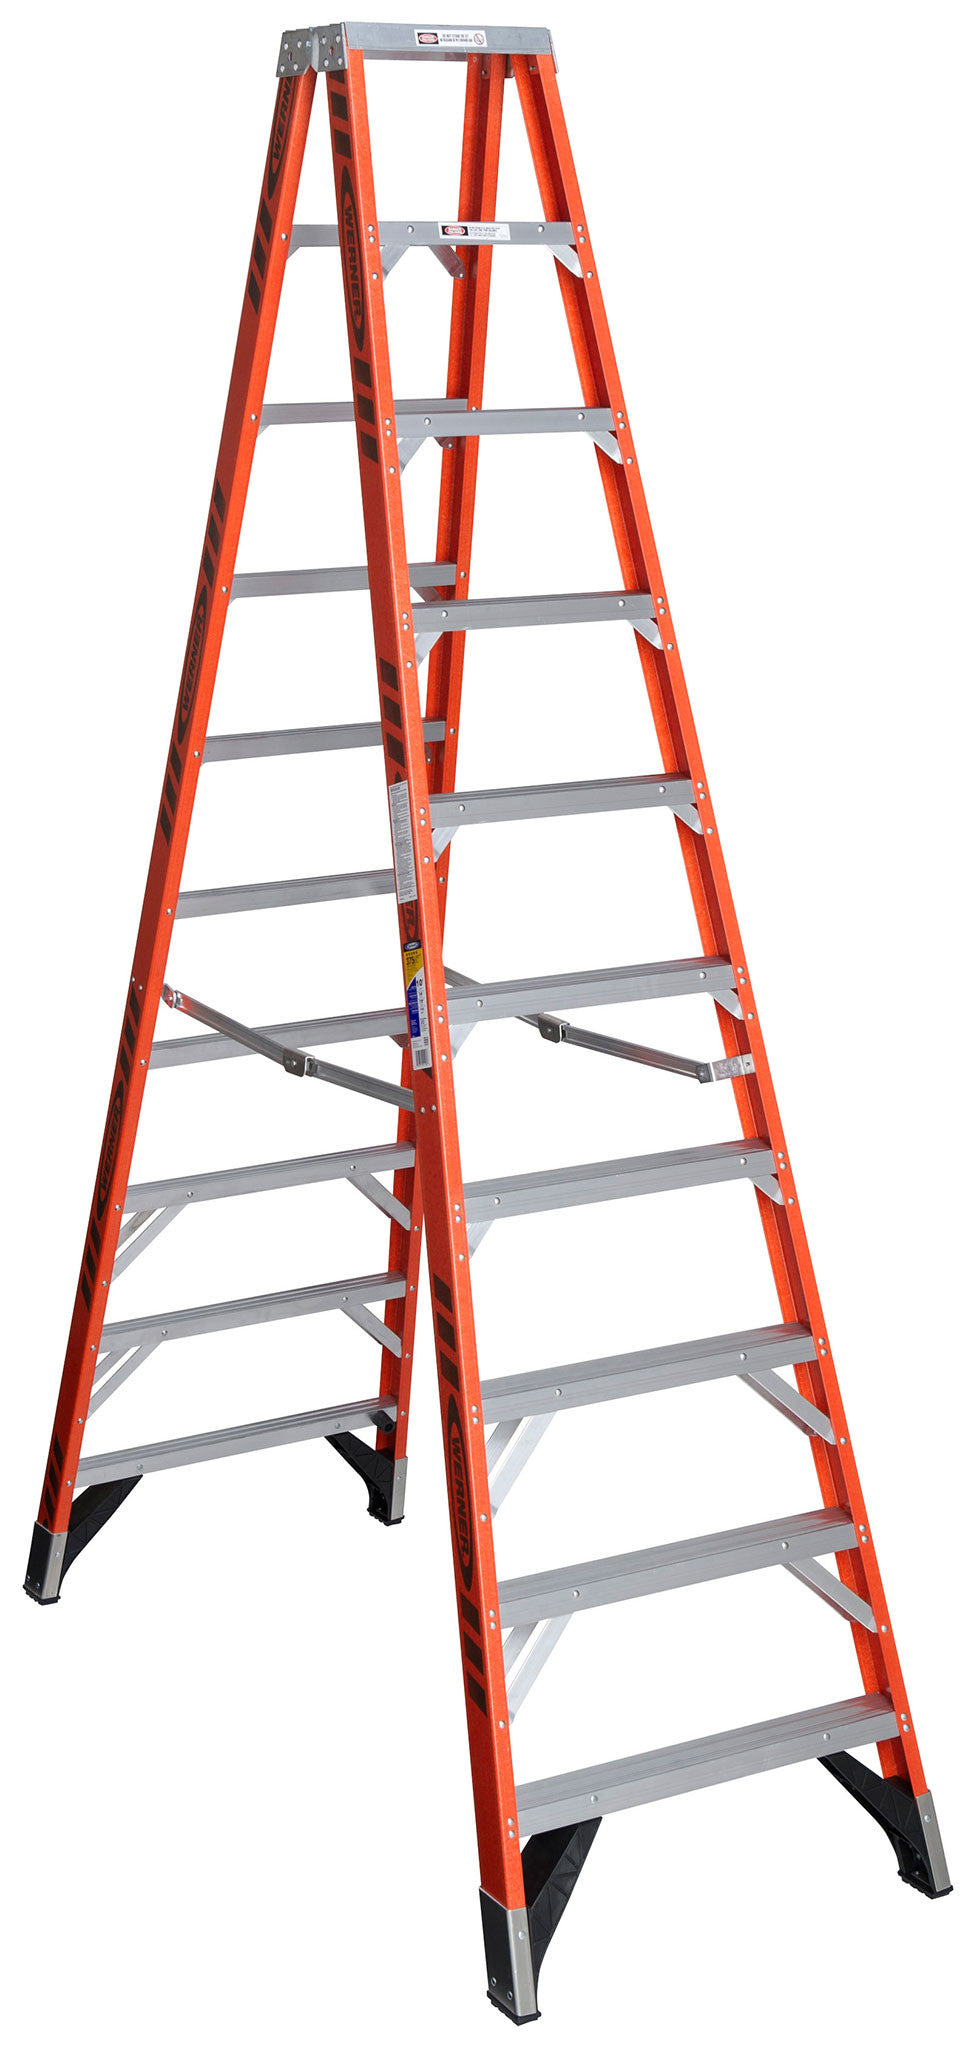 10' STEP LADDER DOUBLE SIDE